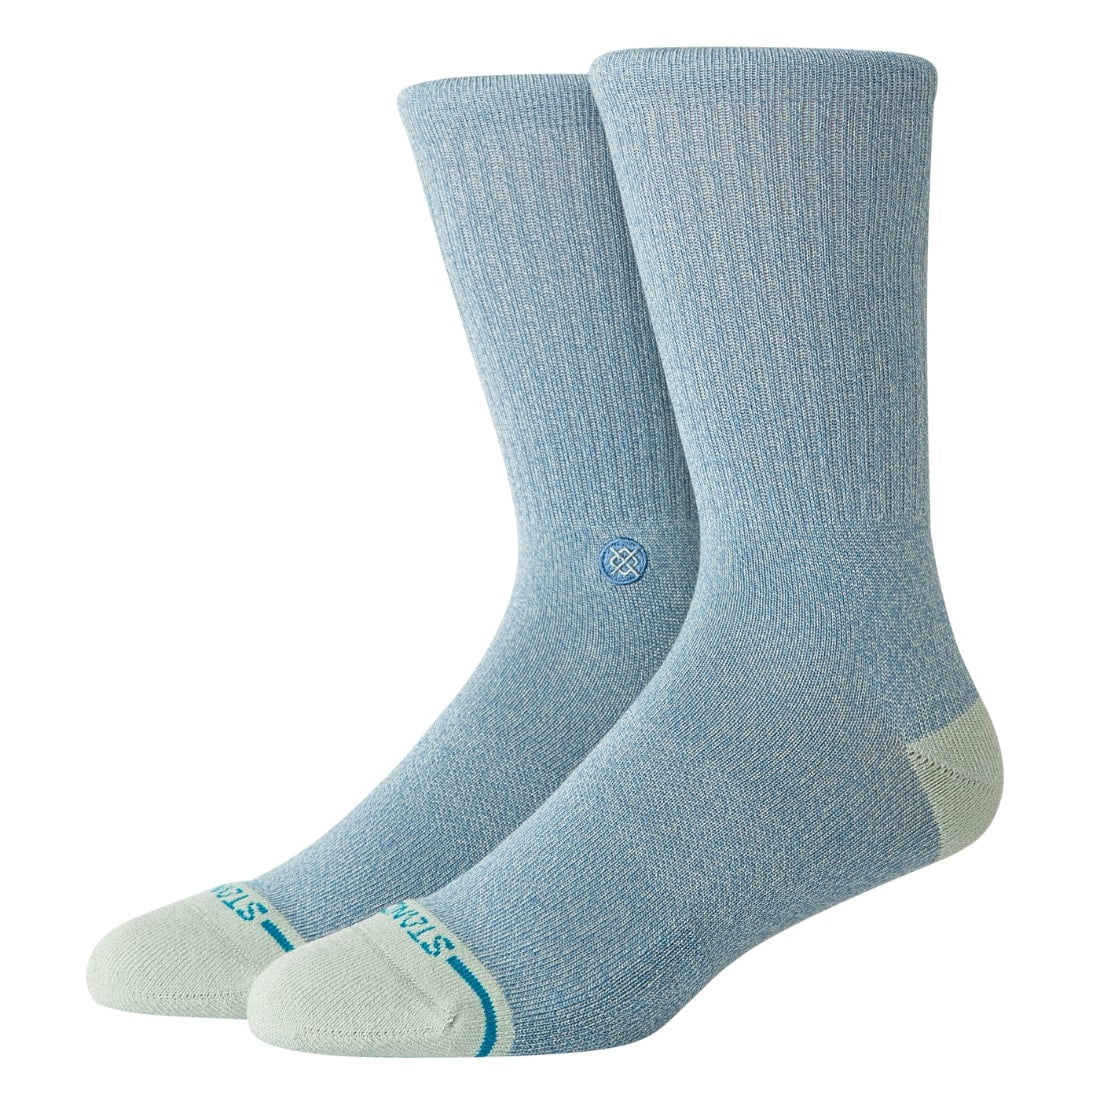 Stance Seaborn Butterblend Infiknit Socks - Blue - Unisex Crew Length Socks by Stance